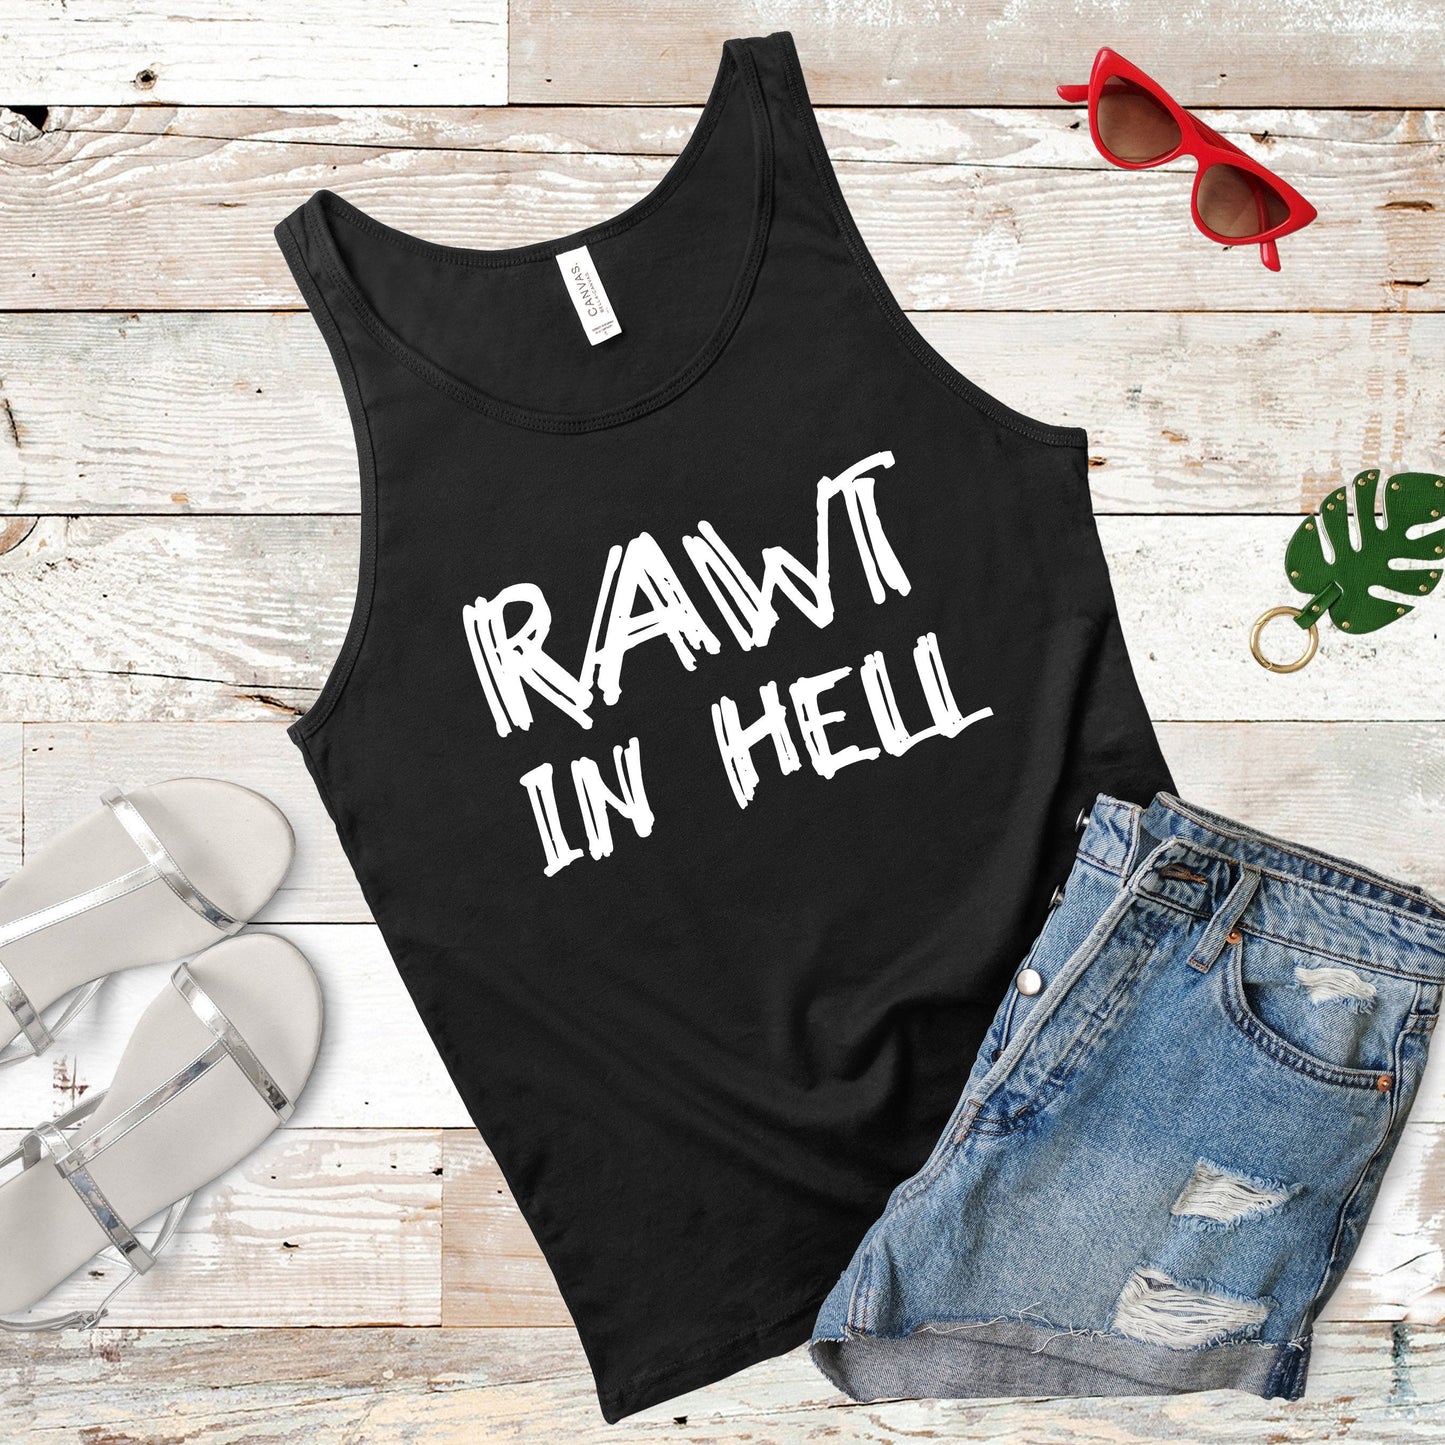 Rawt In Hell | Vanderpump Rules Quote | Unisex Tank Top | Multiple Color Options | Made To Order